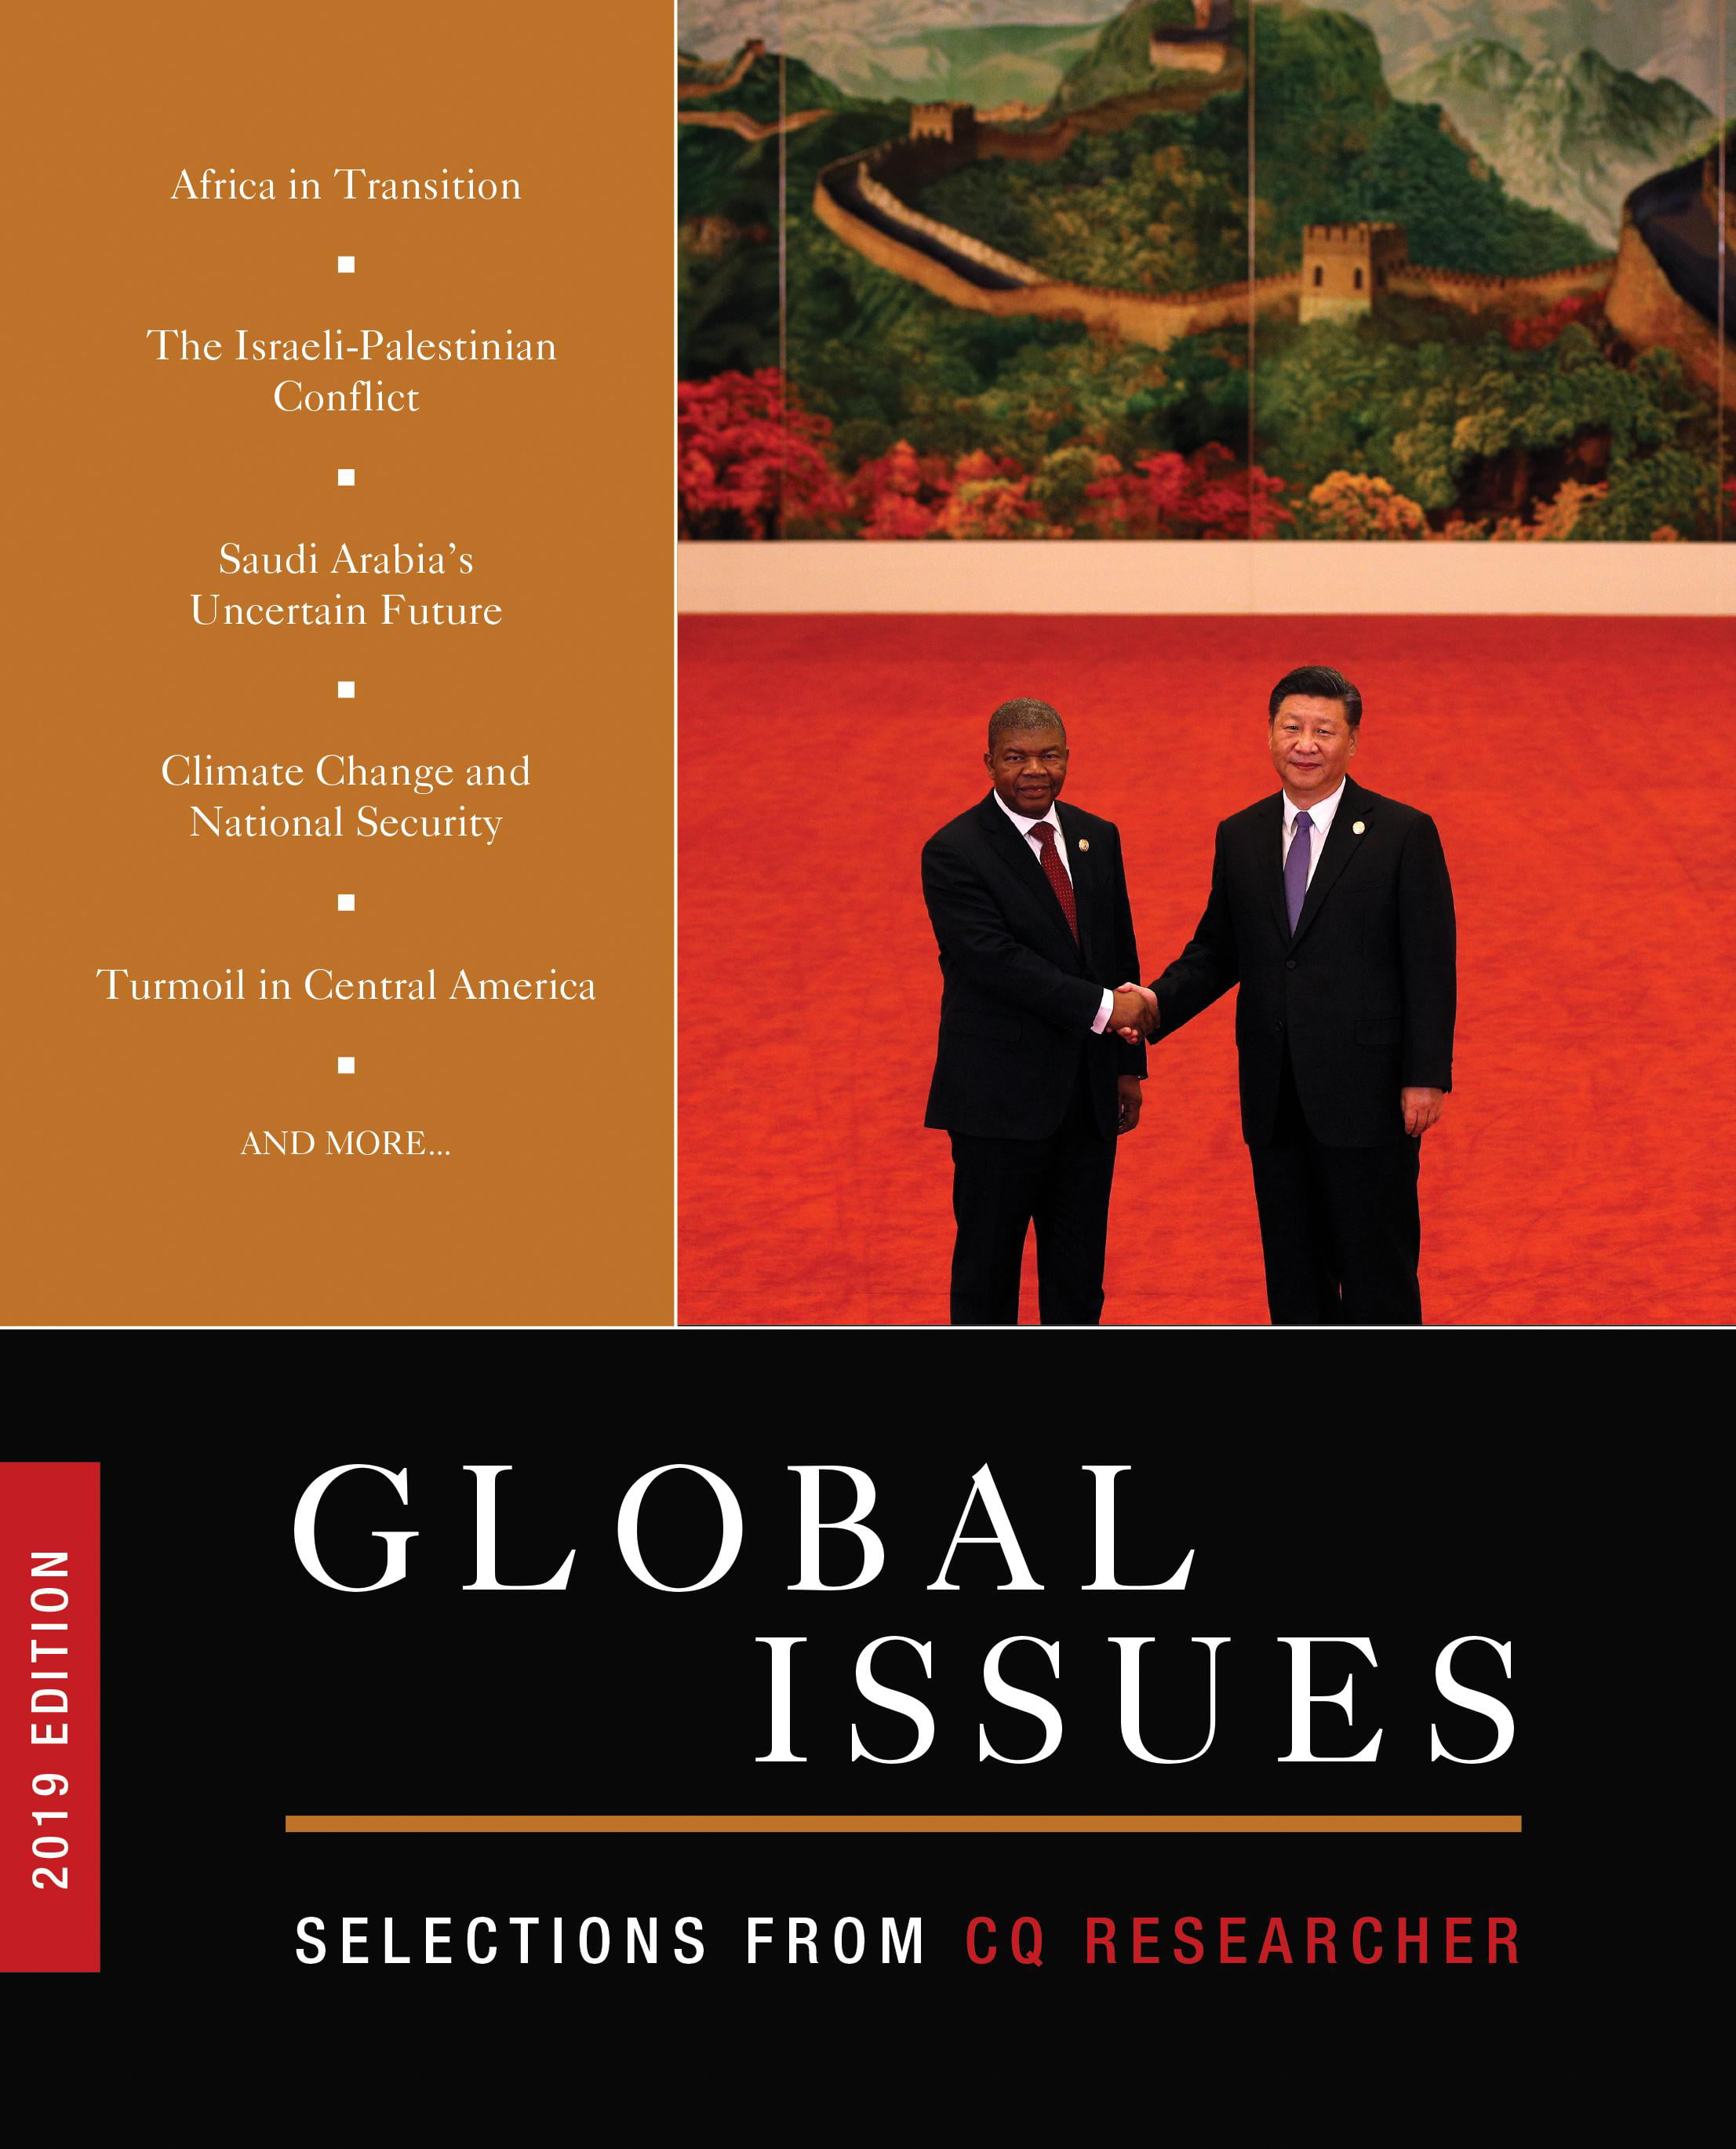 Global Issues Selections from CQ Researcher (Paperback)